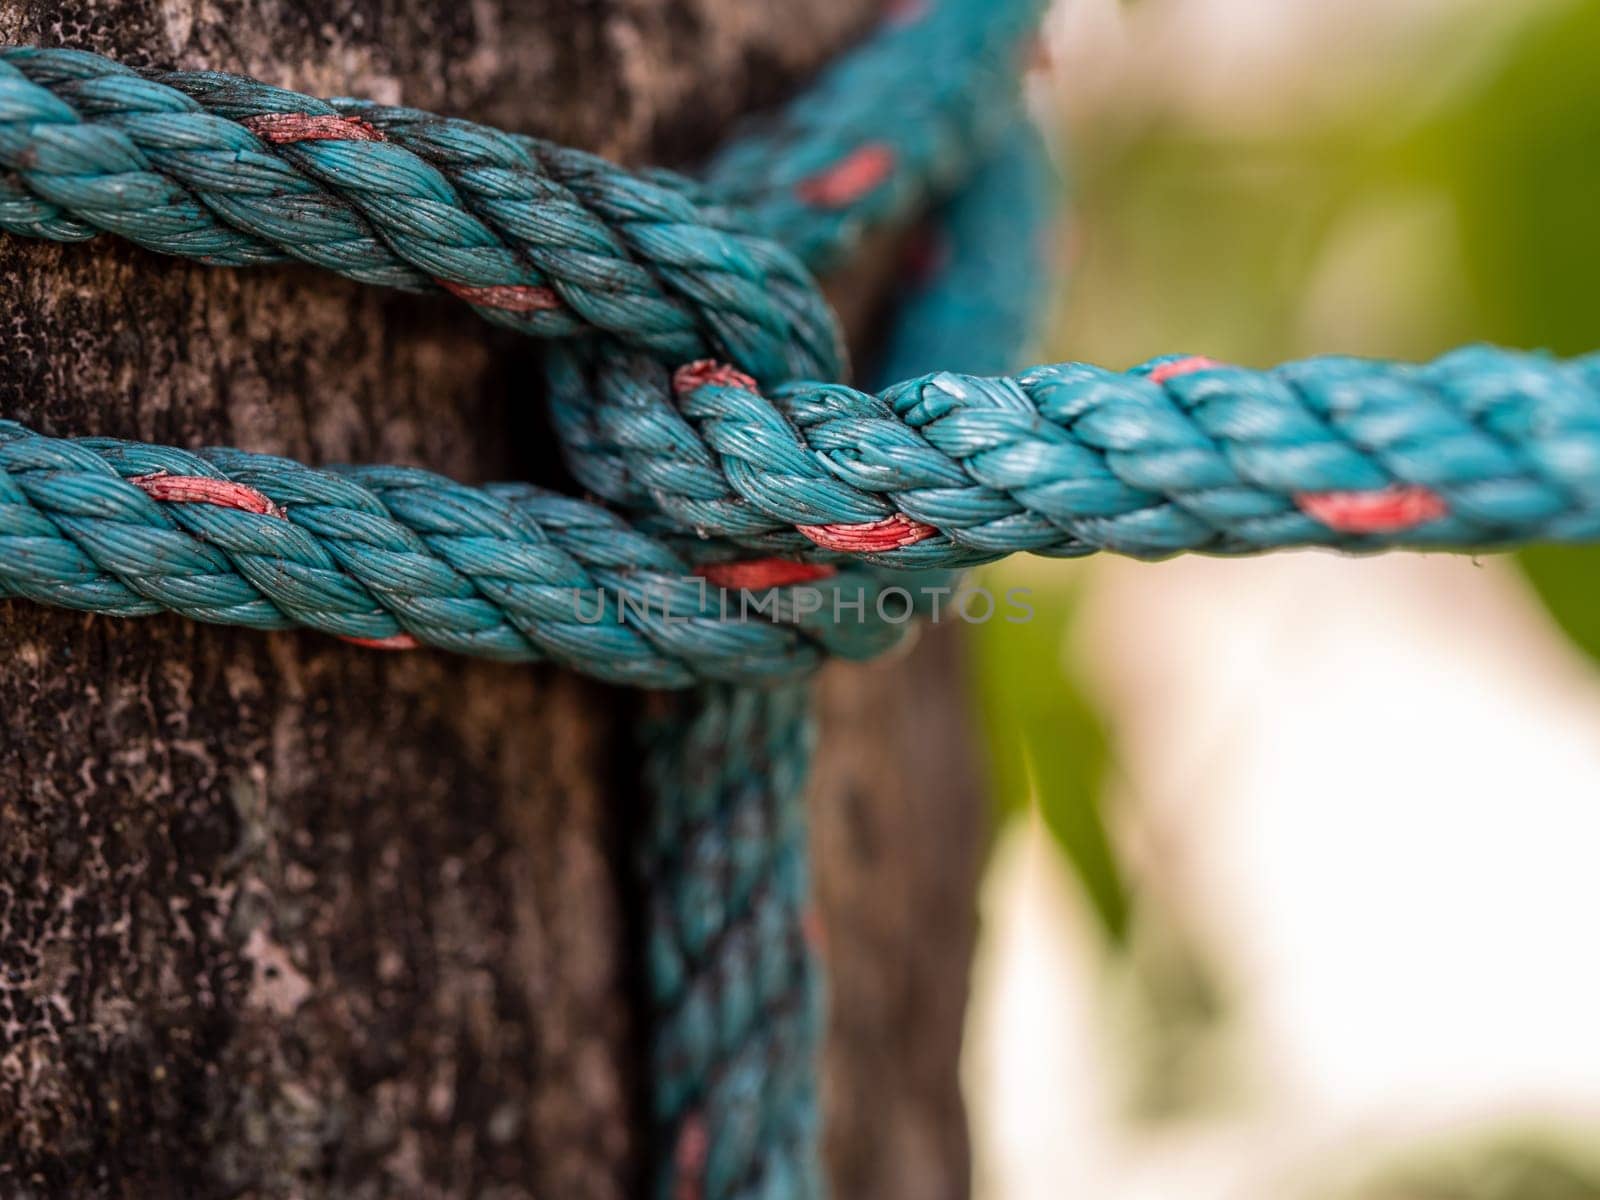 The nylon rope was tightly tied to the big tree